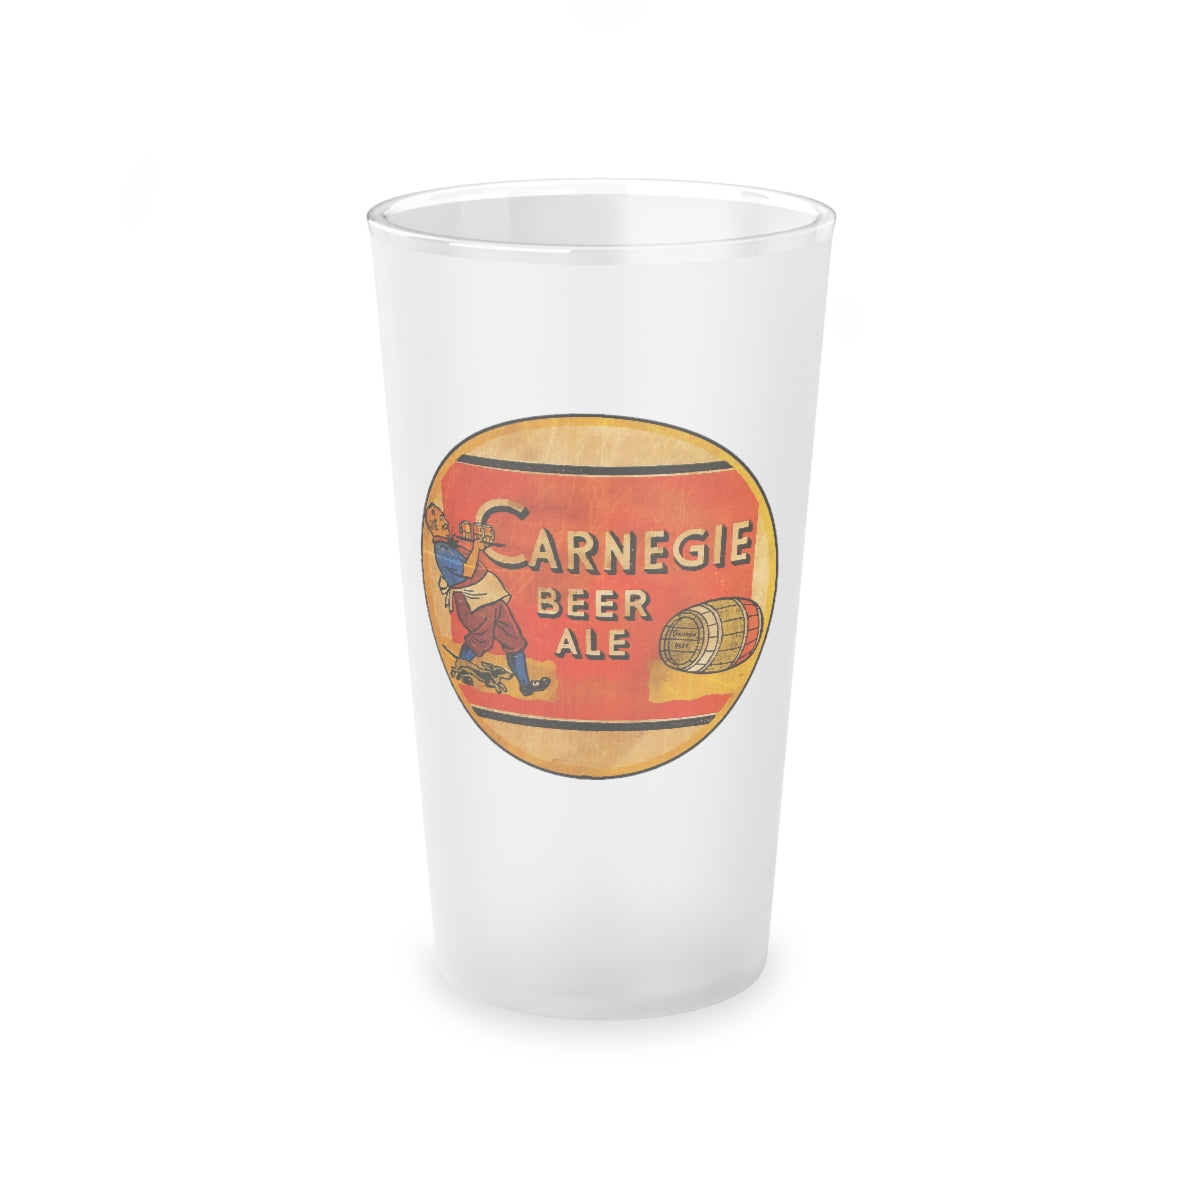 CARNEGIE BEER ALE - Frosted Pint Glass, 16oz - Yinzylvania